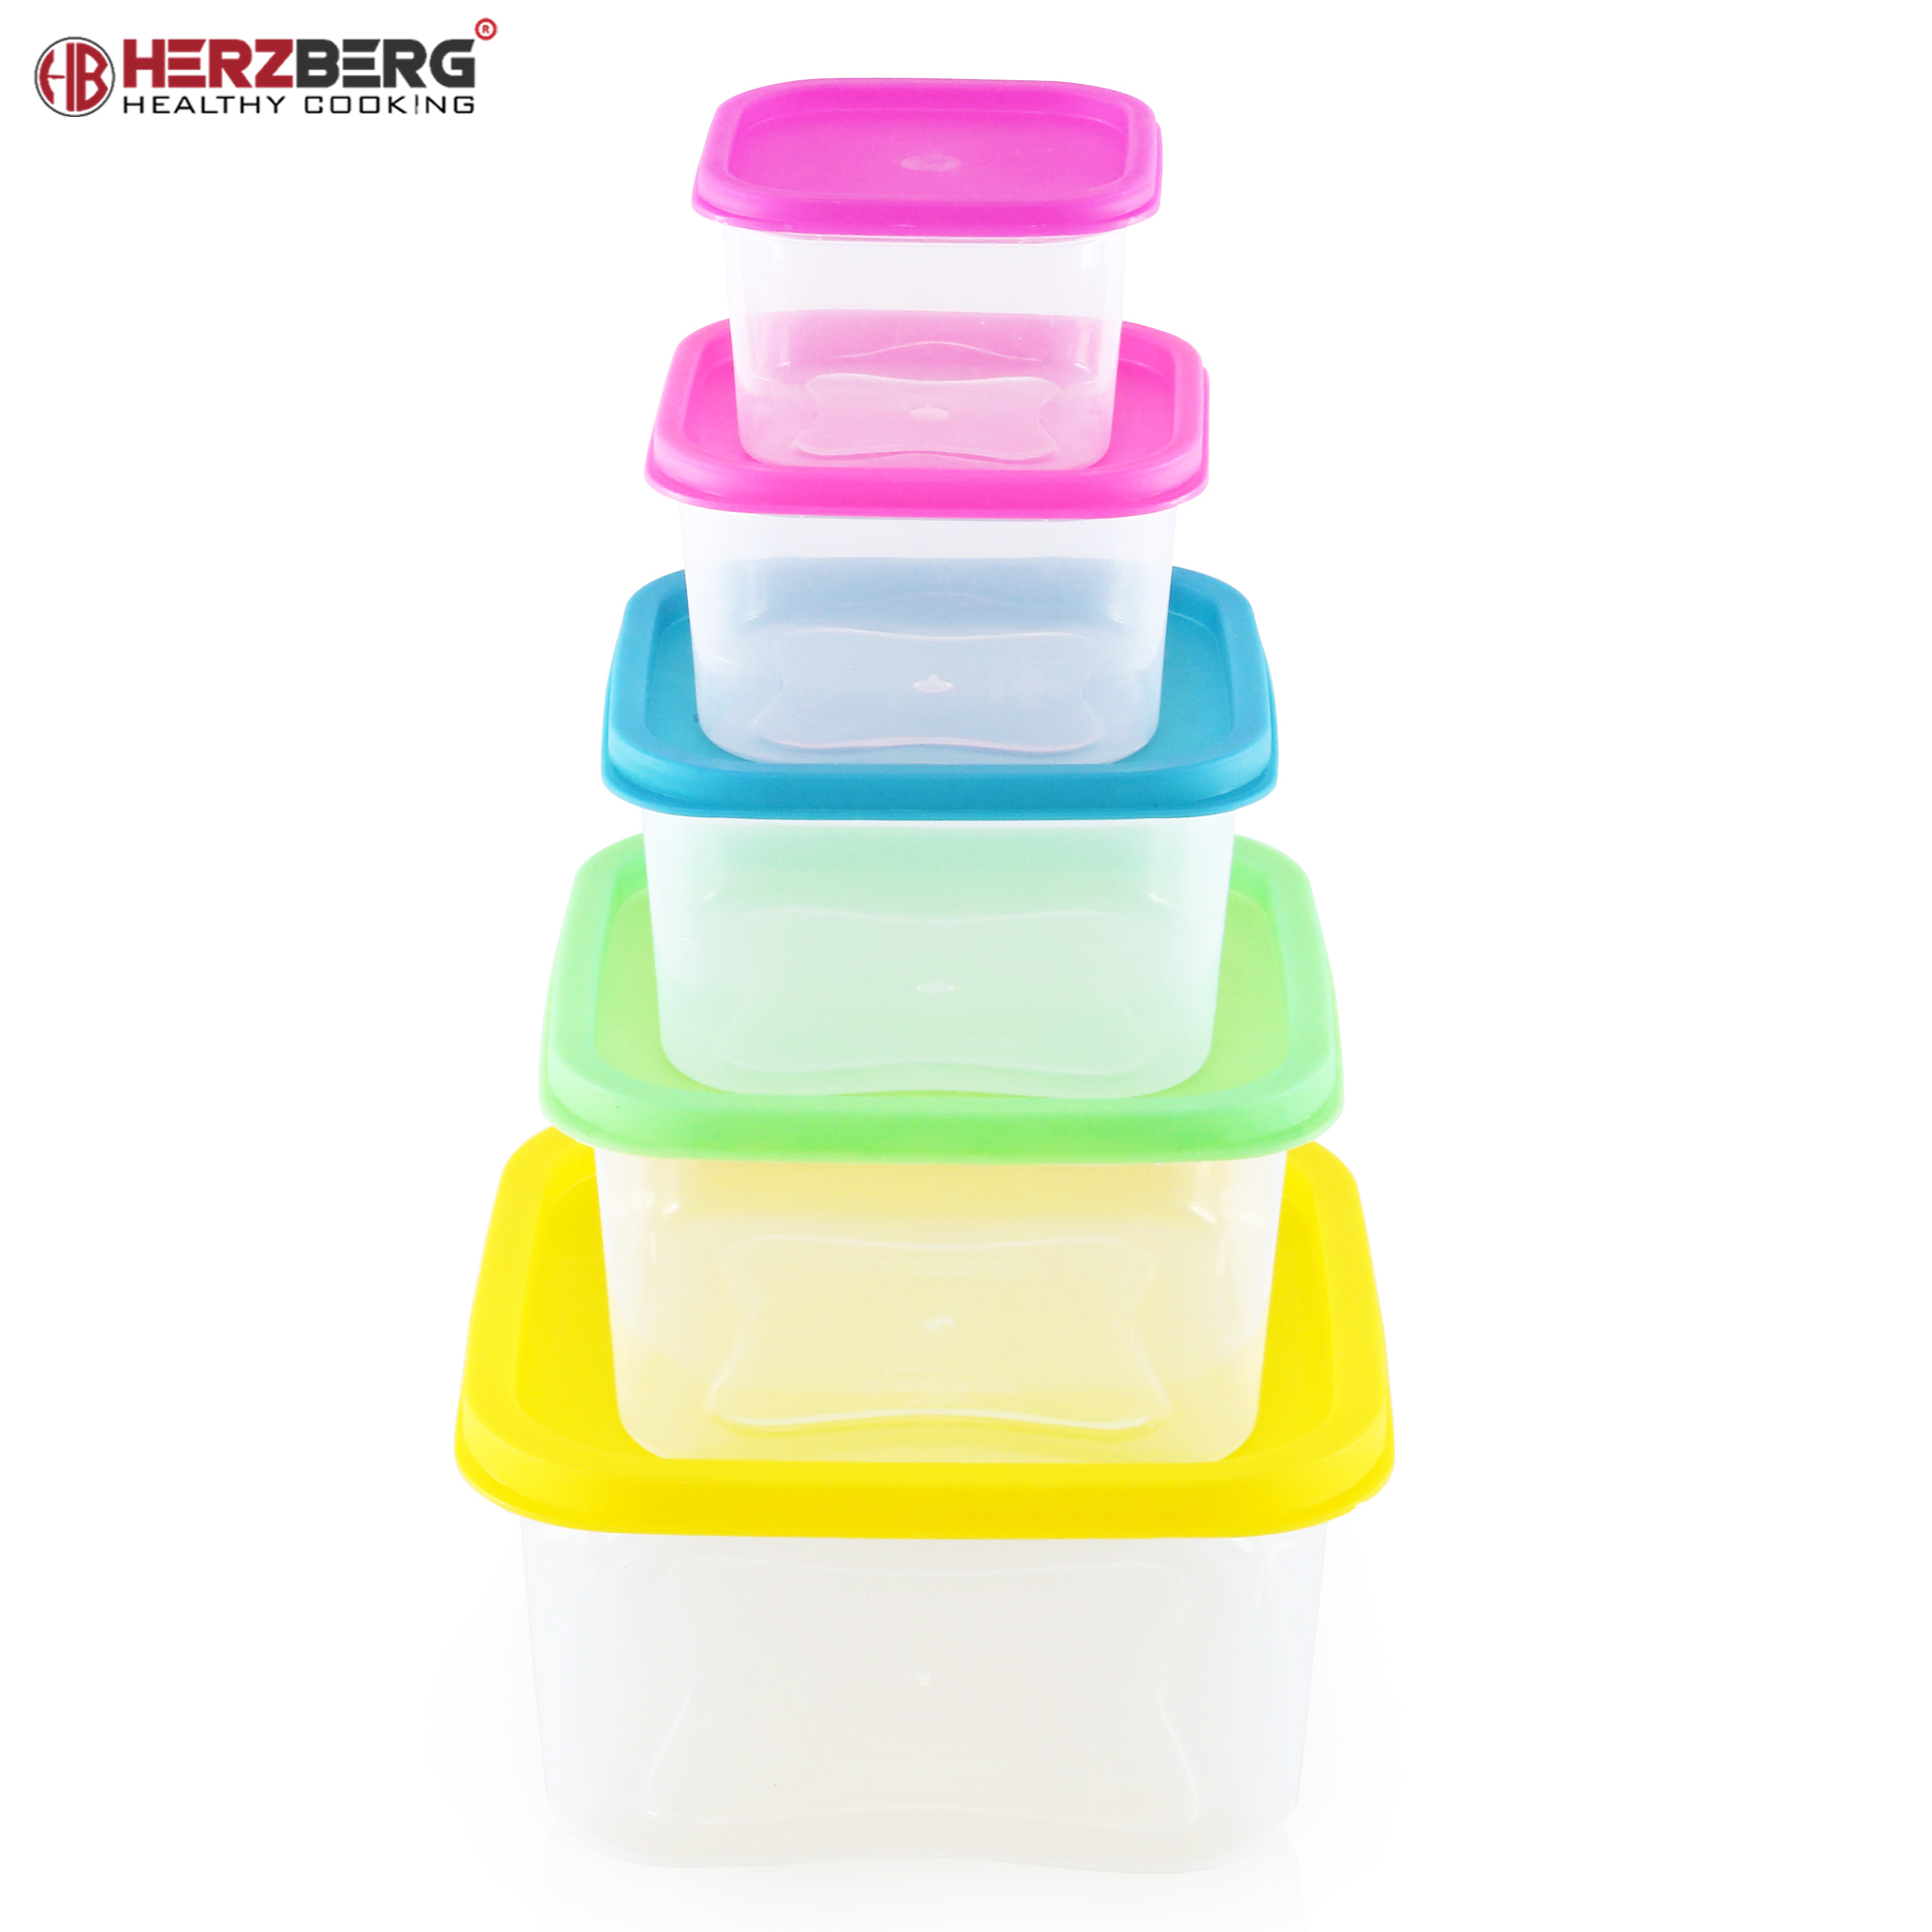 Herzberg HG-SFS5N1: 5-in-1 Square Food Storage Container Set